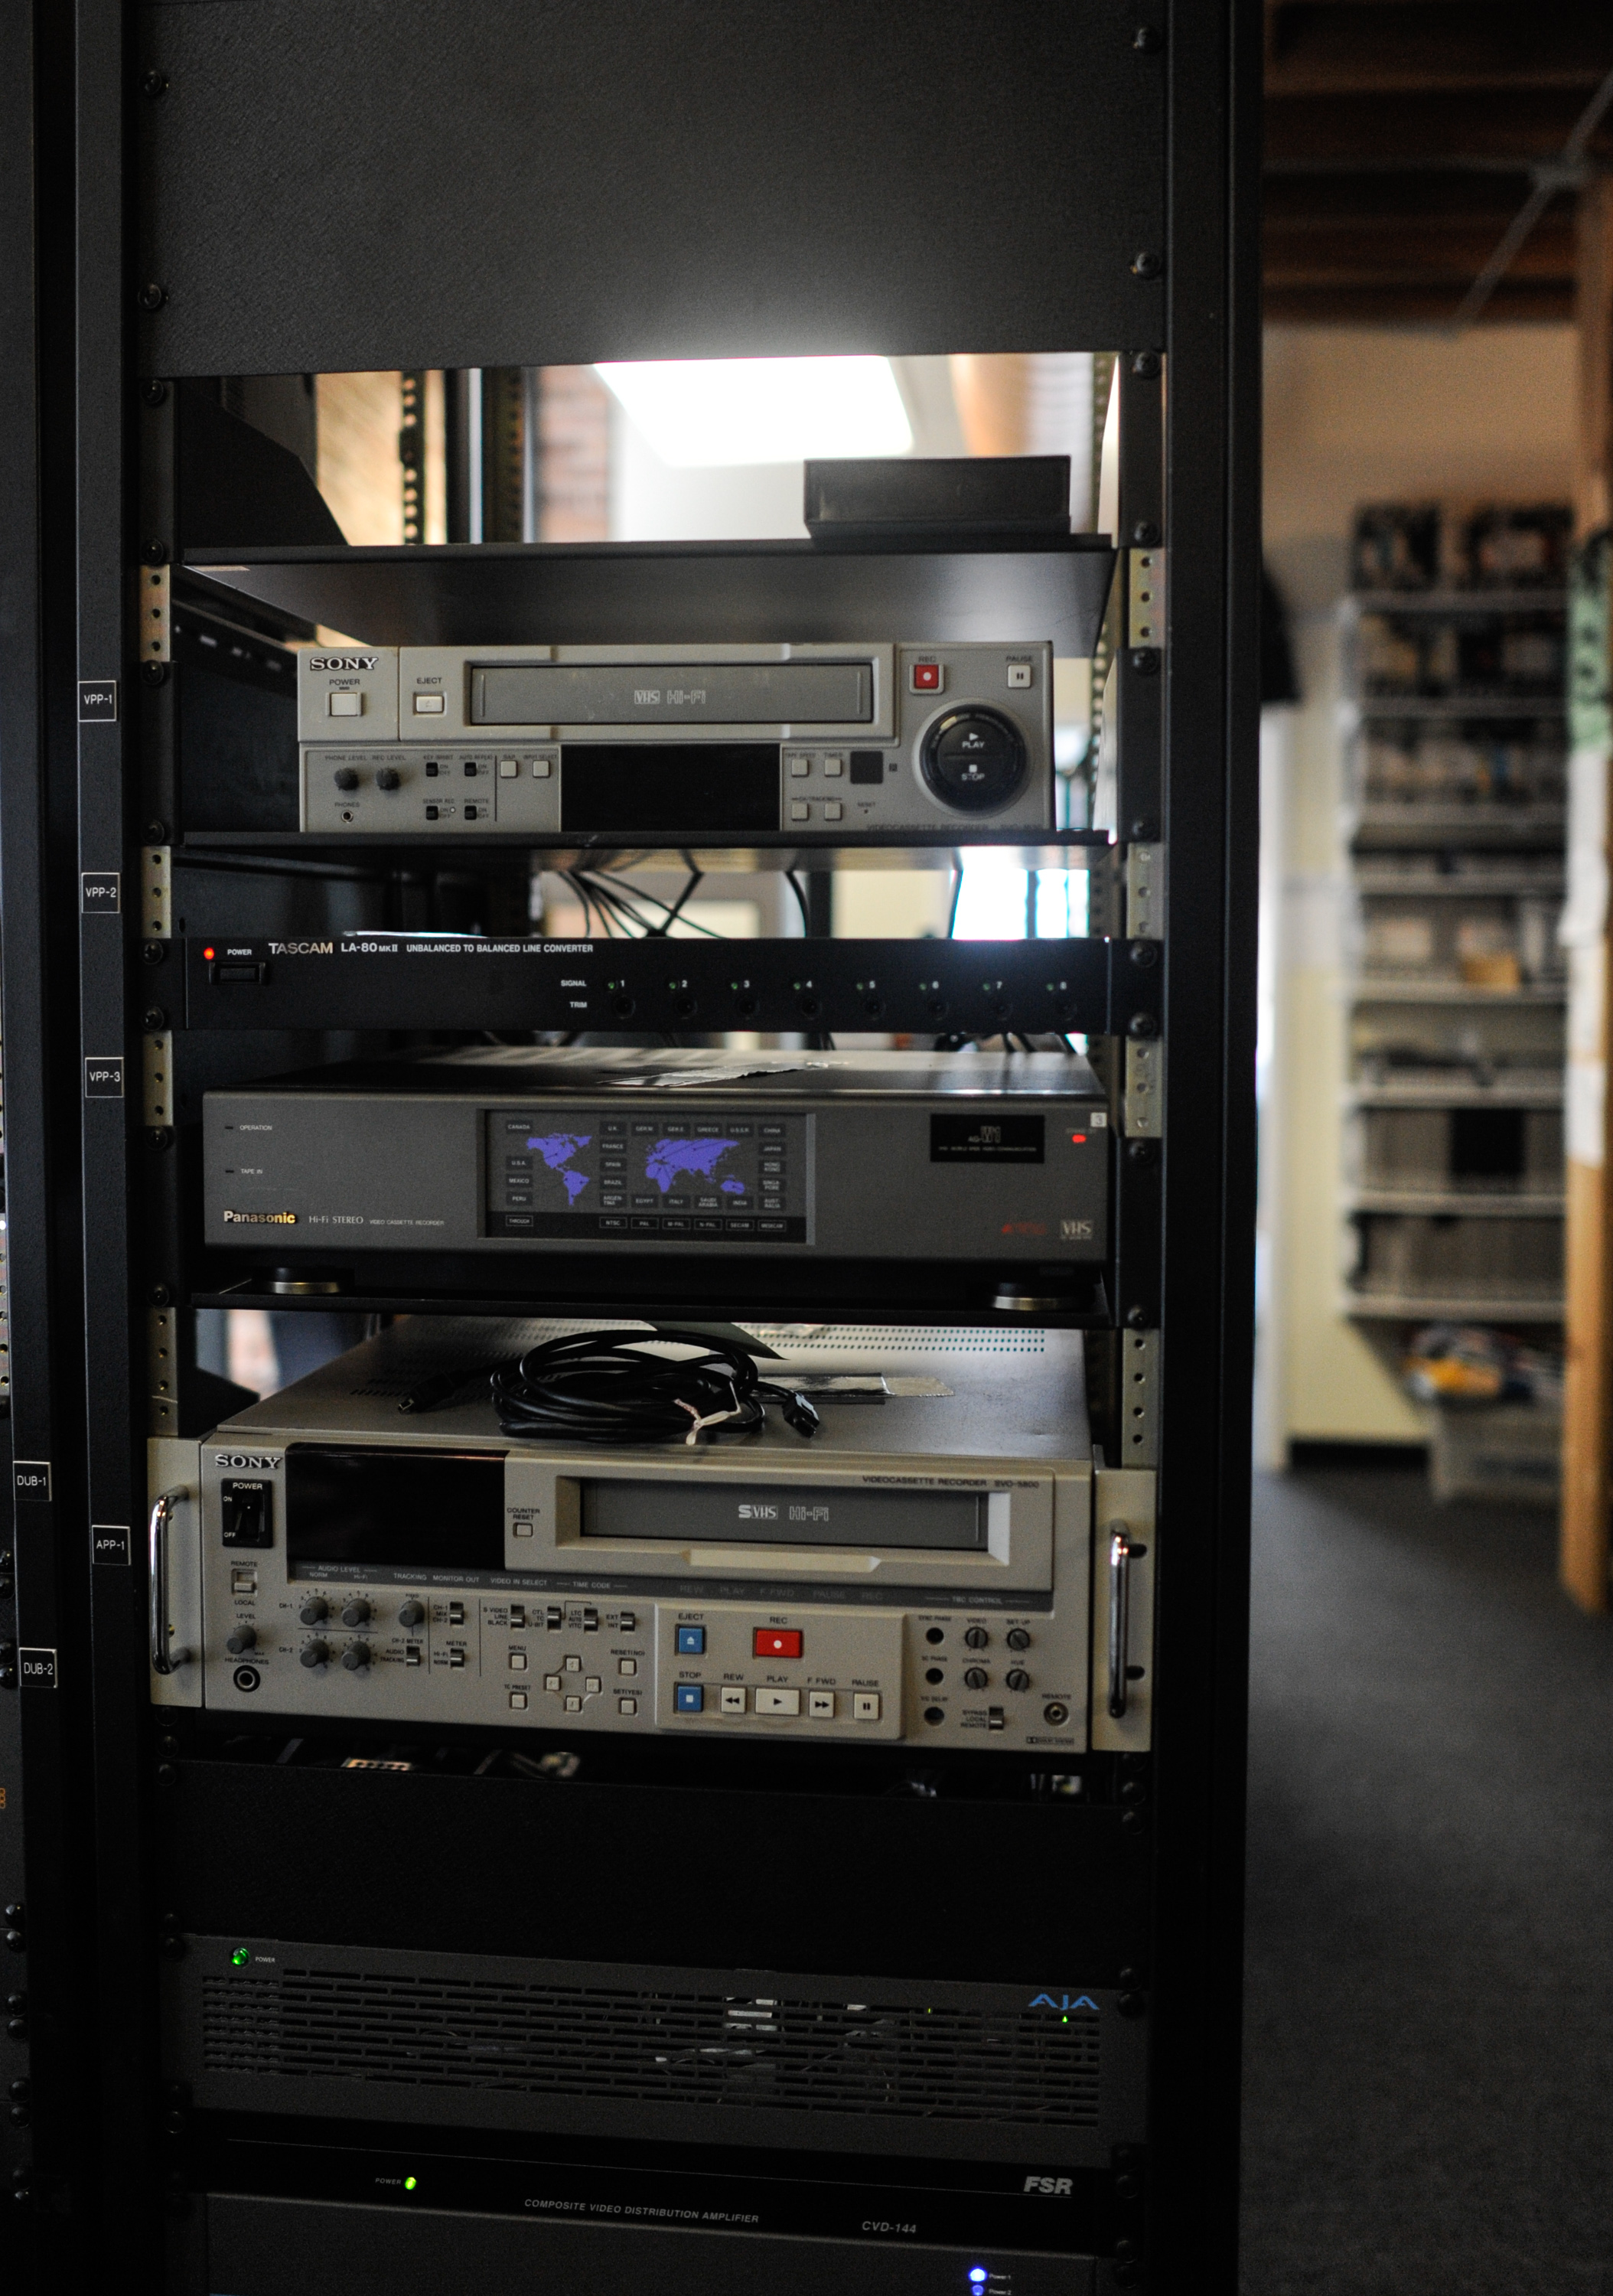 The image shows various equipment used for digitizing and playing different video formats. In the background, shelves hold video from Media Burn's collection. Photo by William Camargo.